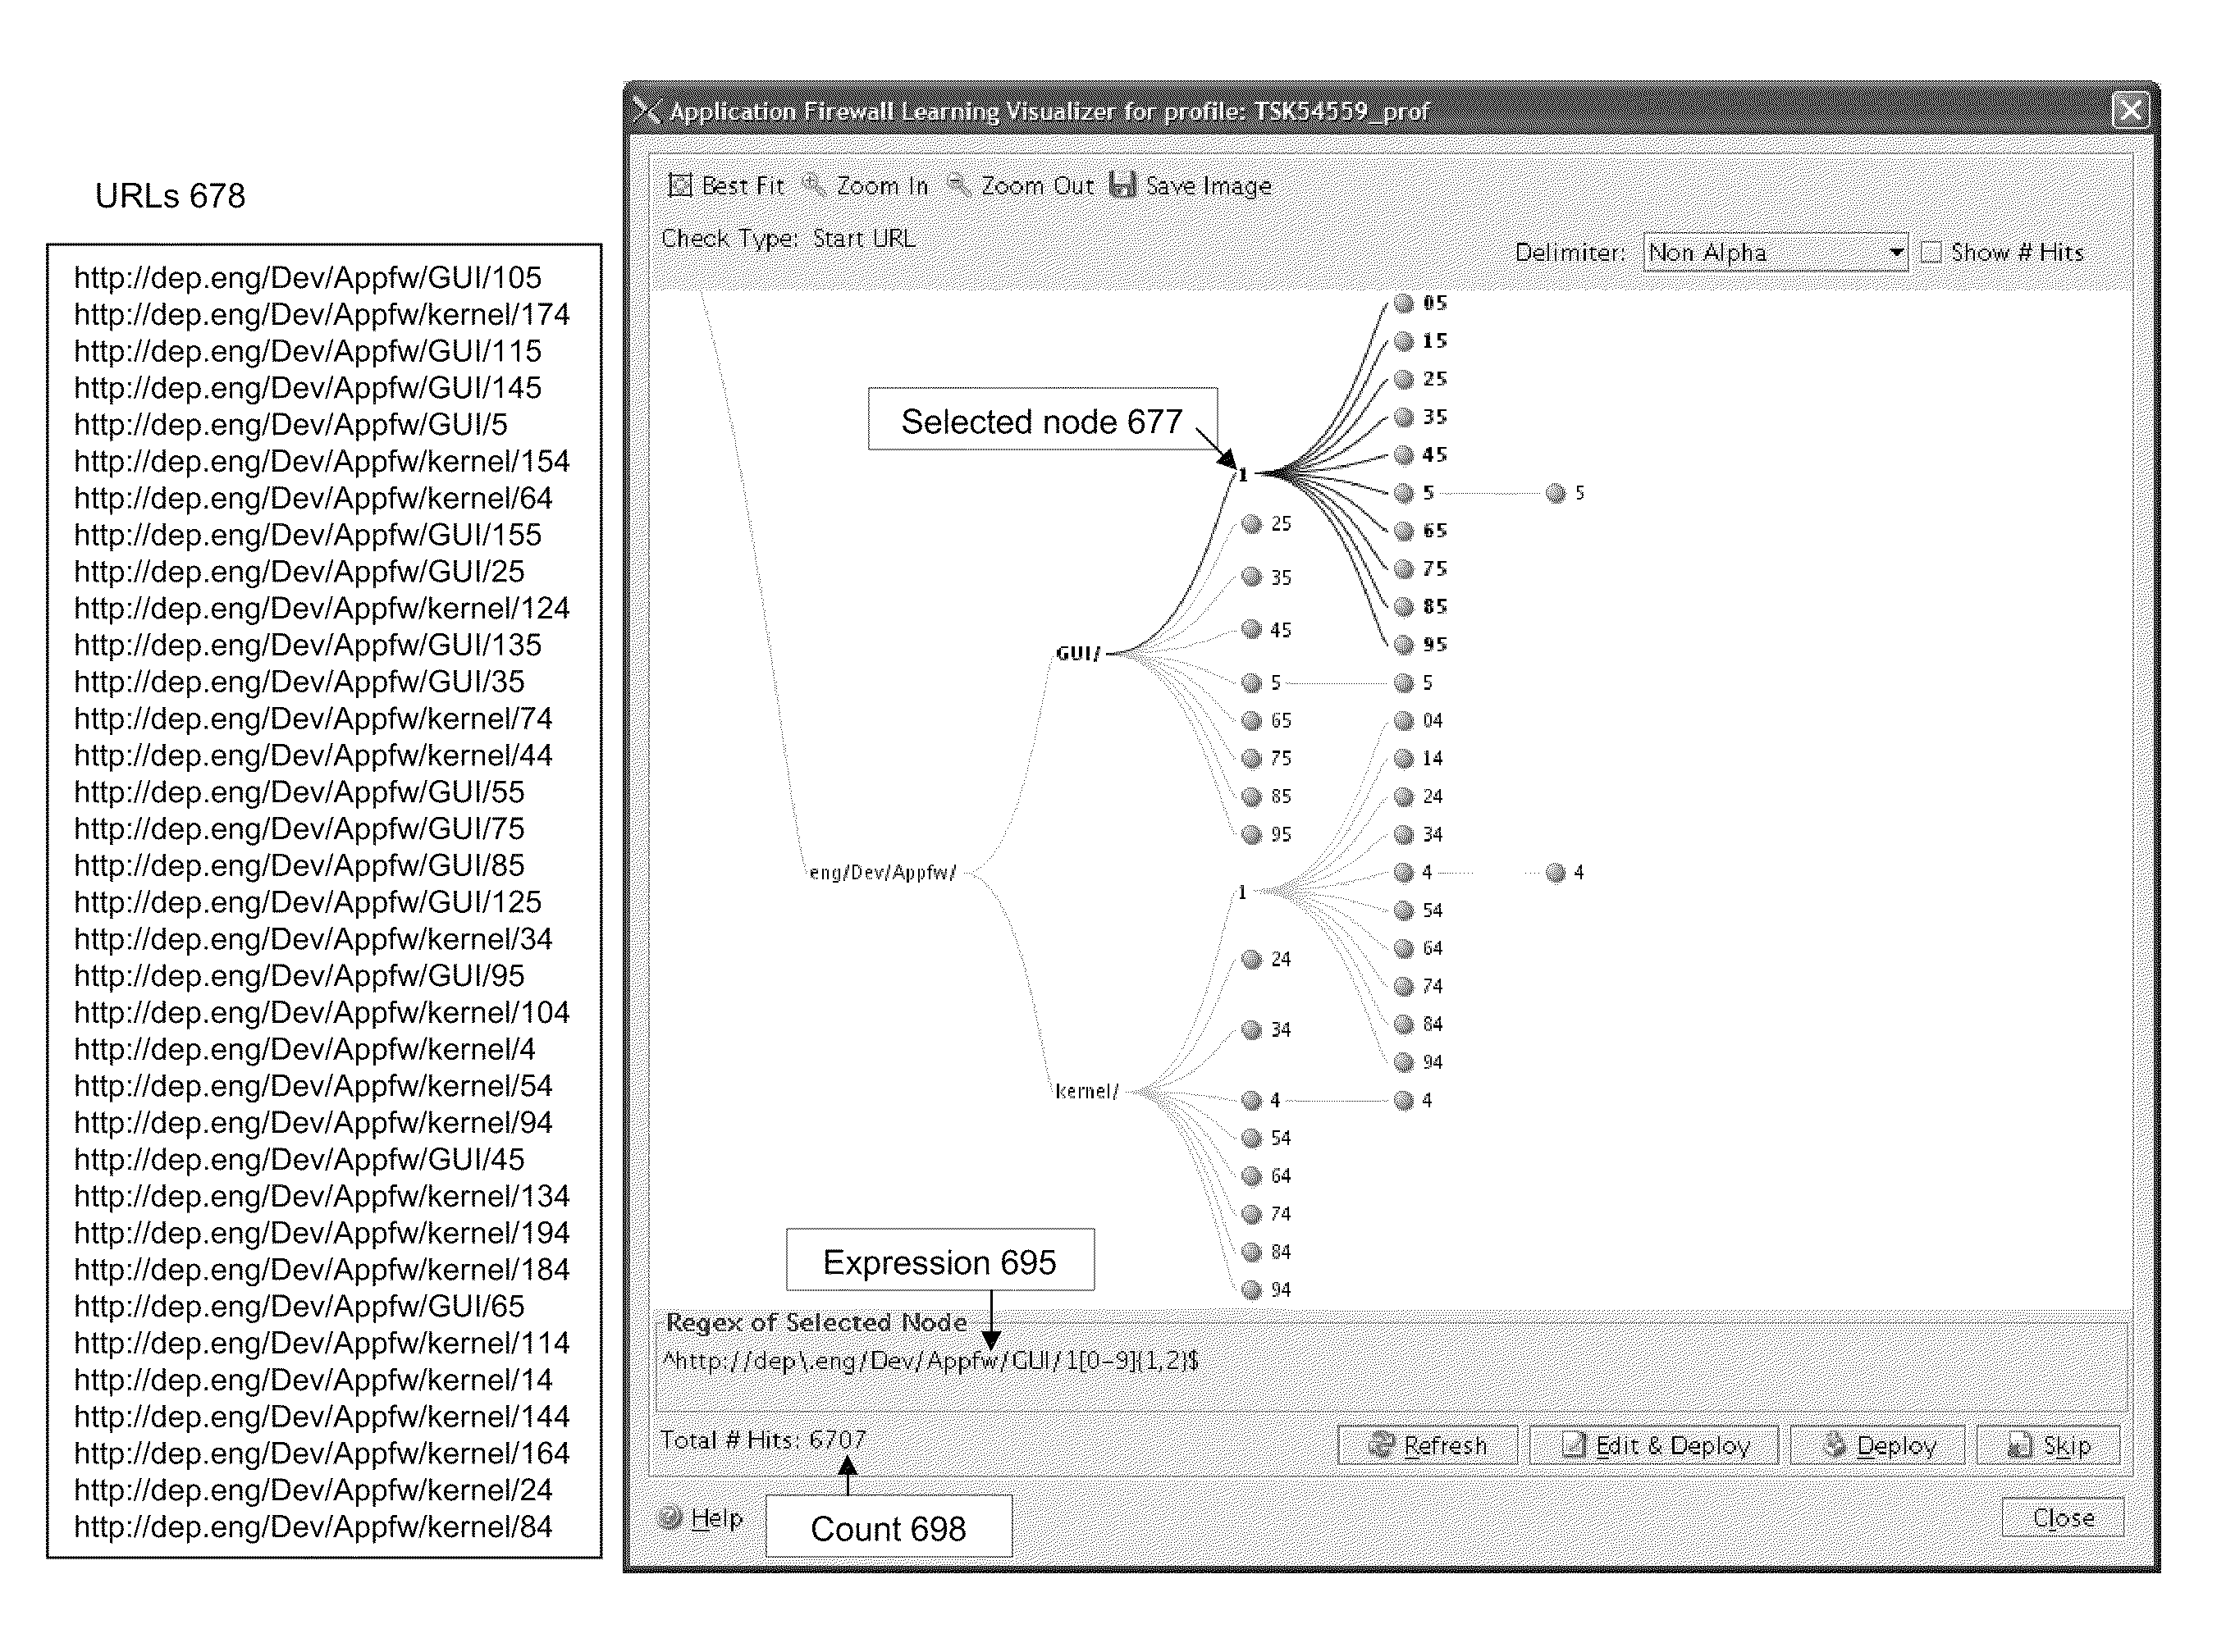 Systems and methods for providing a visualizer for rules of an application firewall